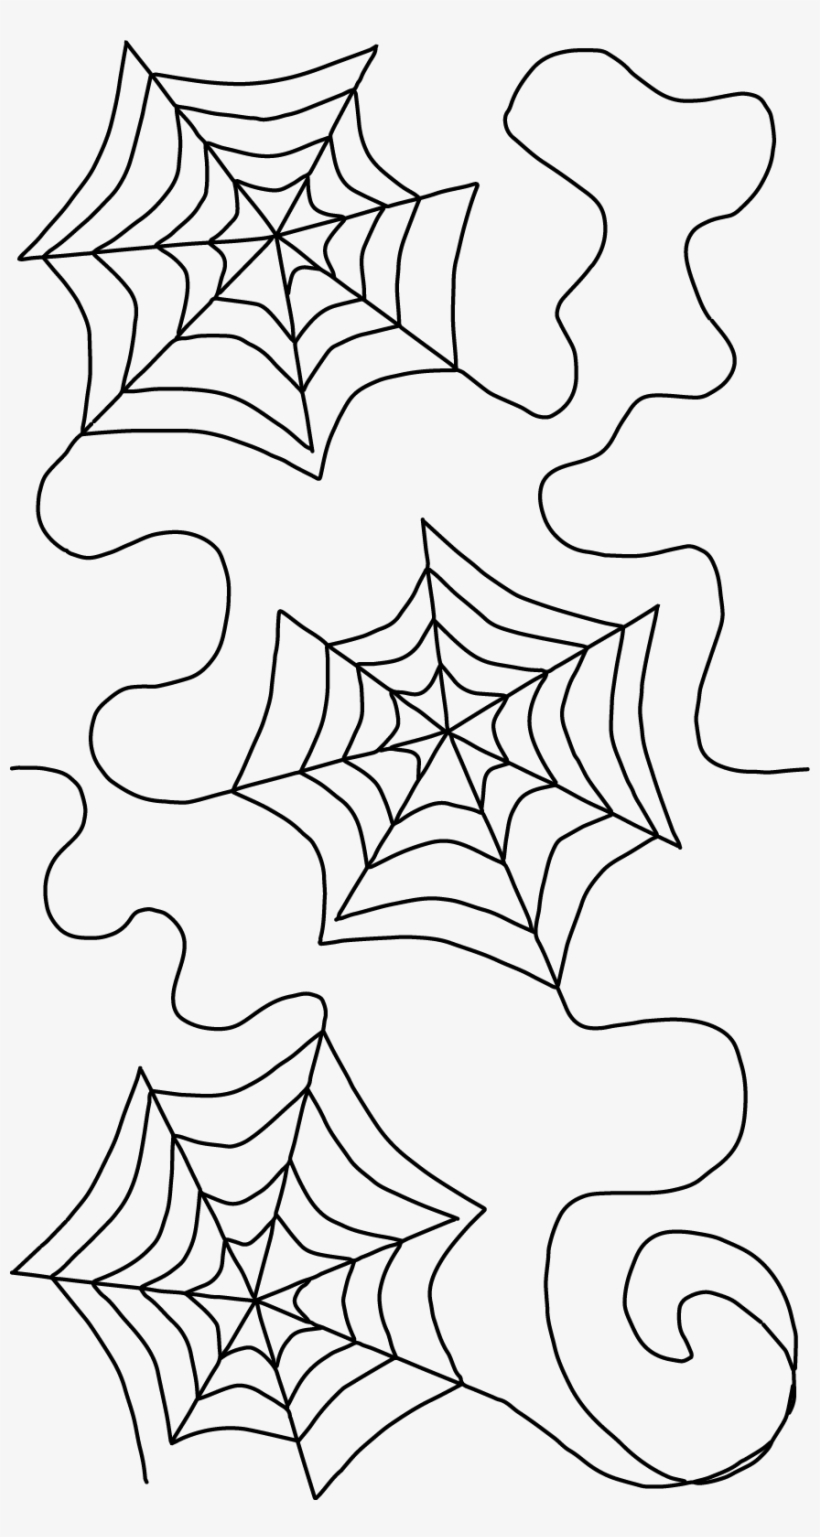 Here Are Images Of The Designs In The Expansion Pack - Spider Web, transparent png #4032914